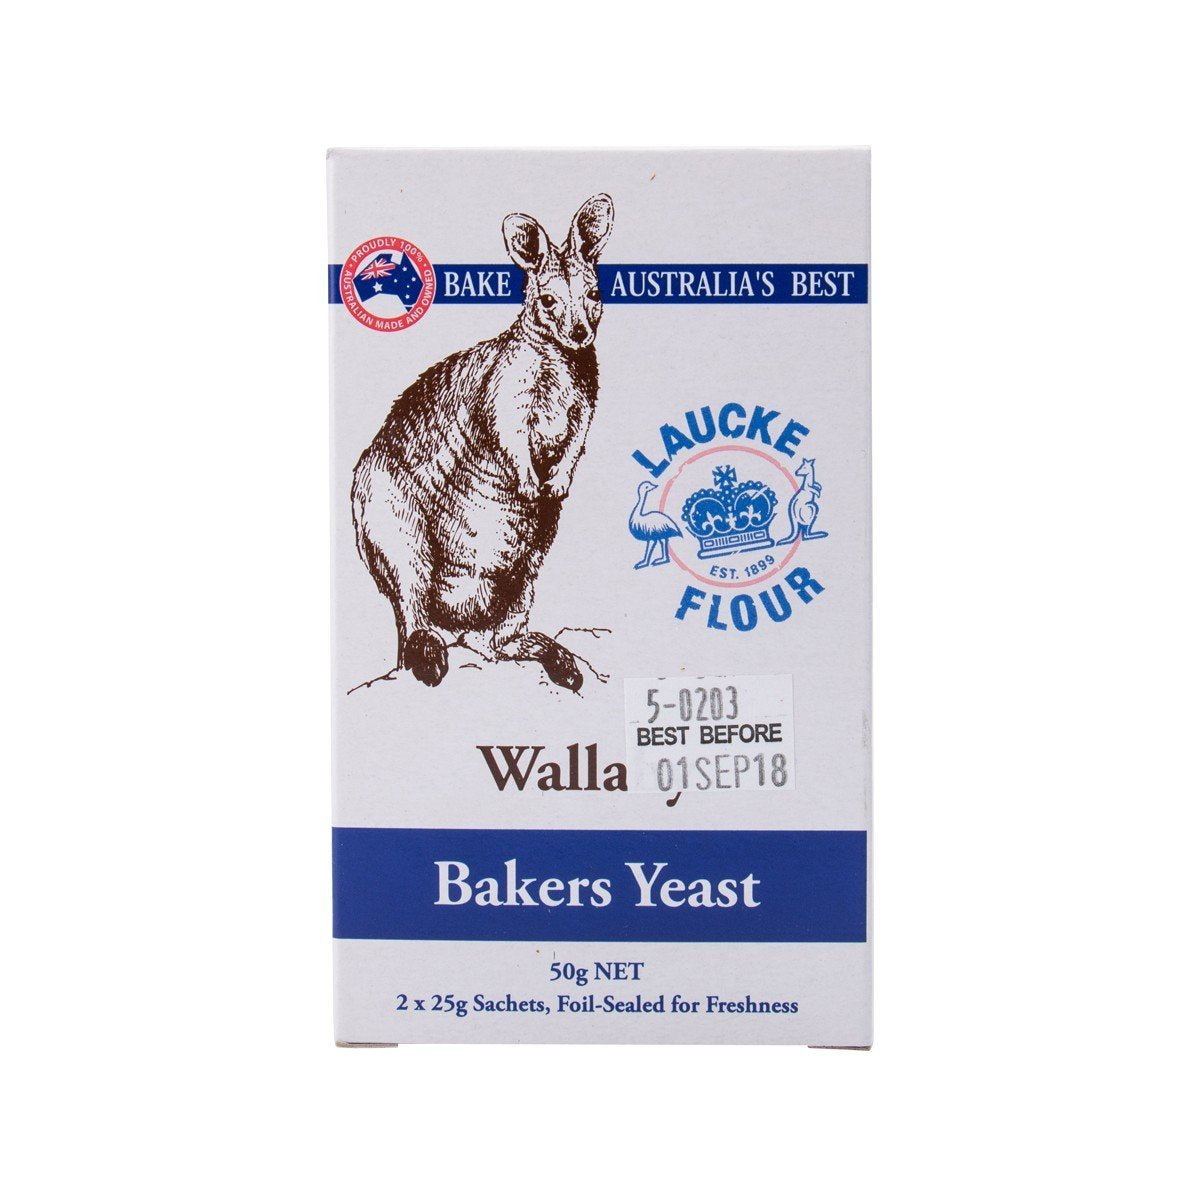 Wallaby Bakers Yeast 50G